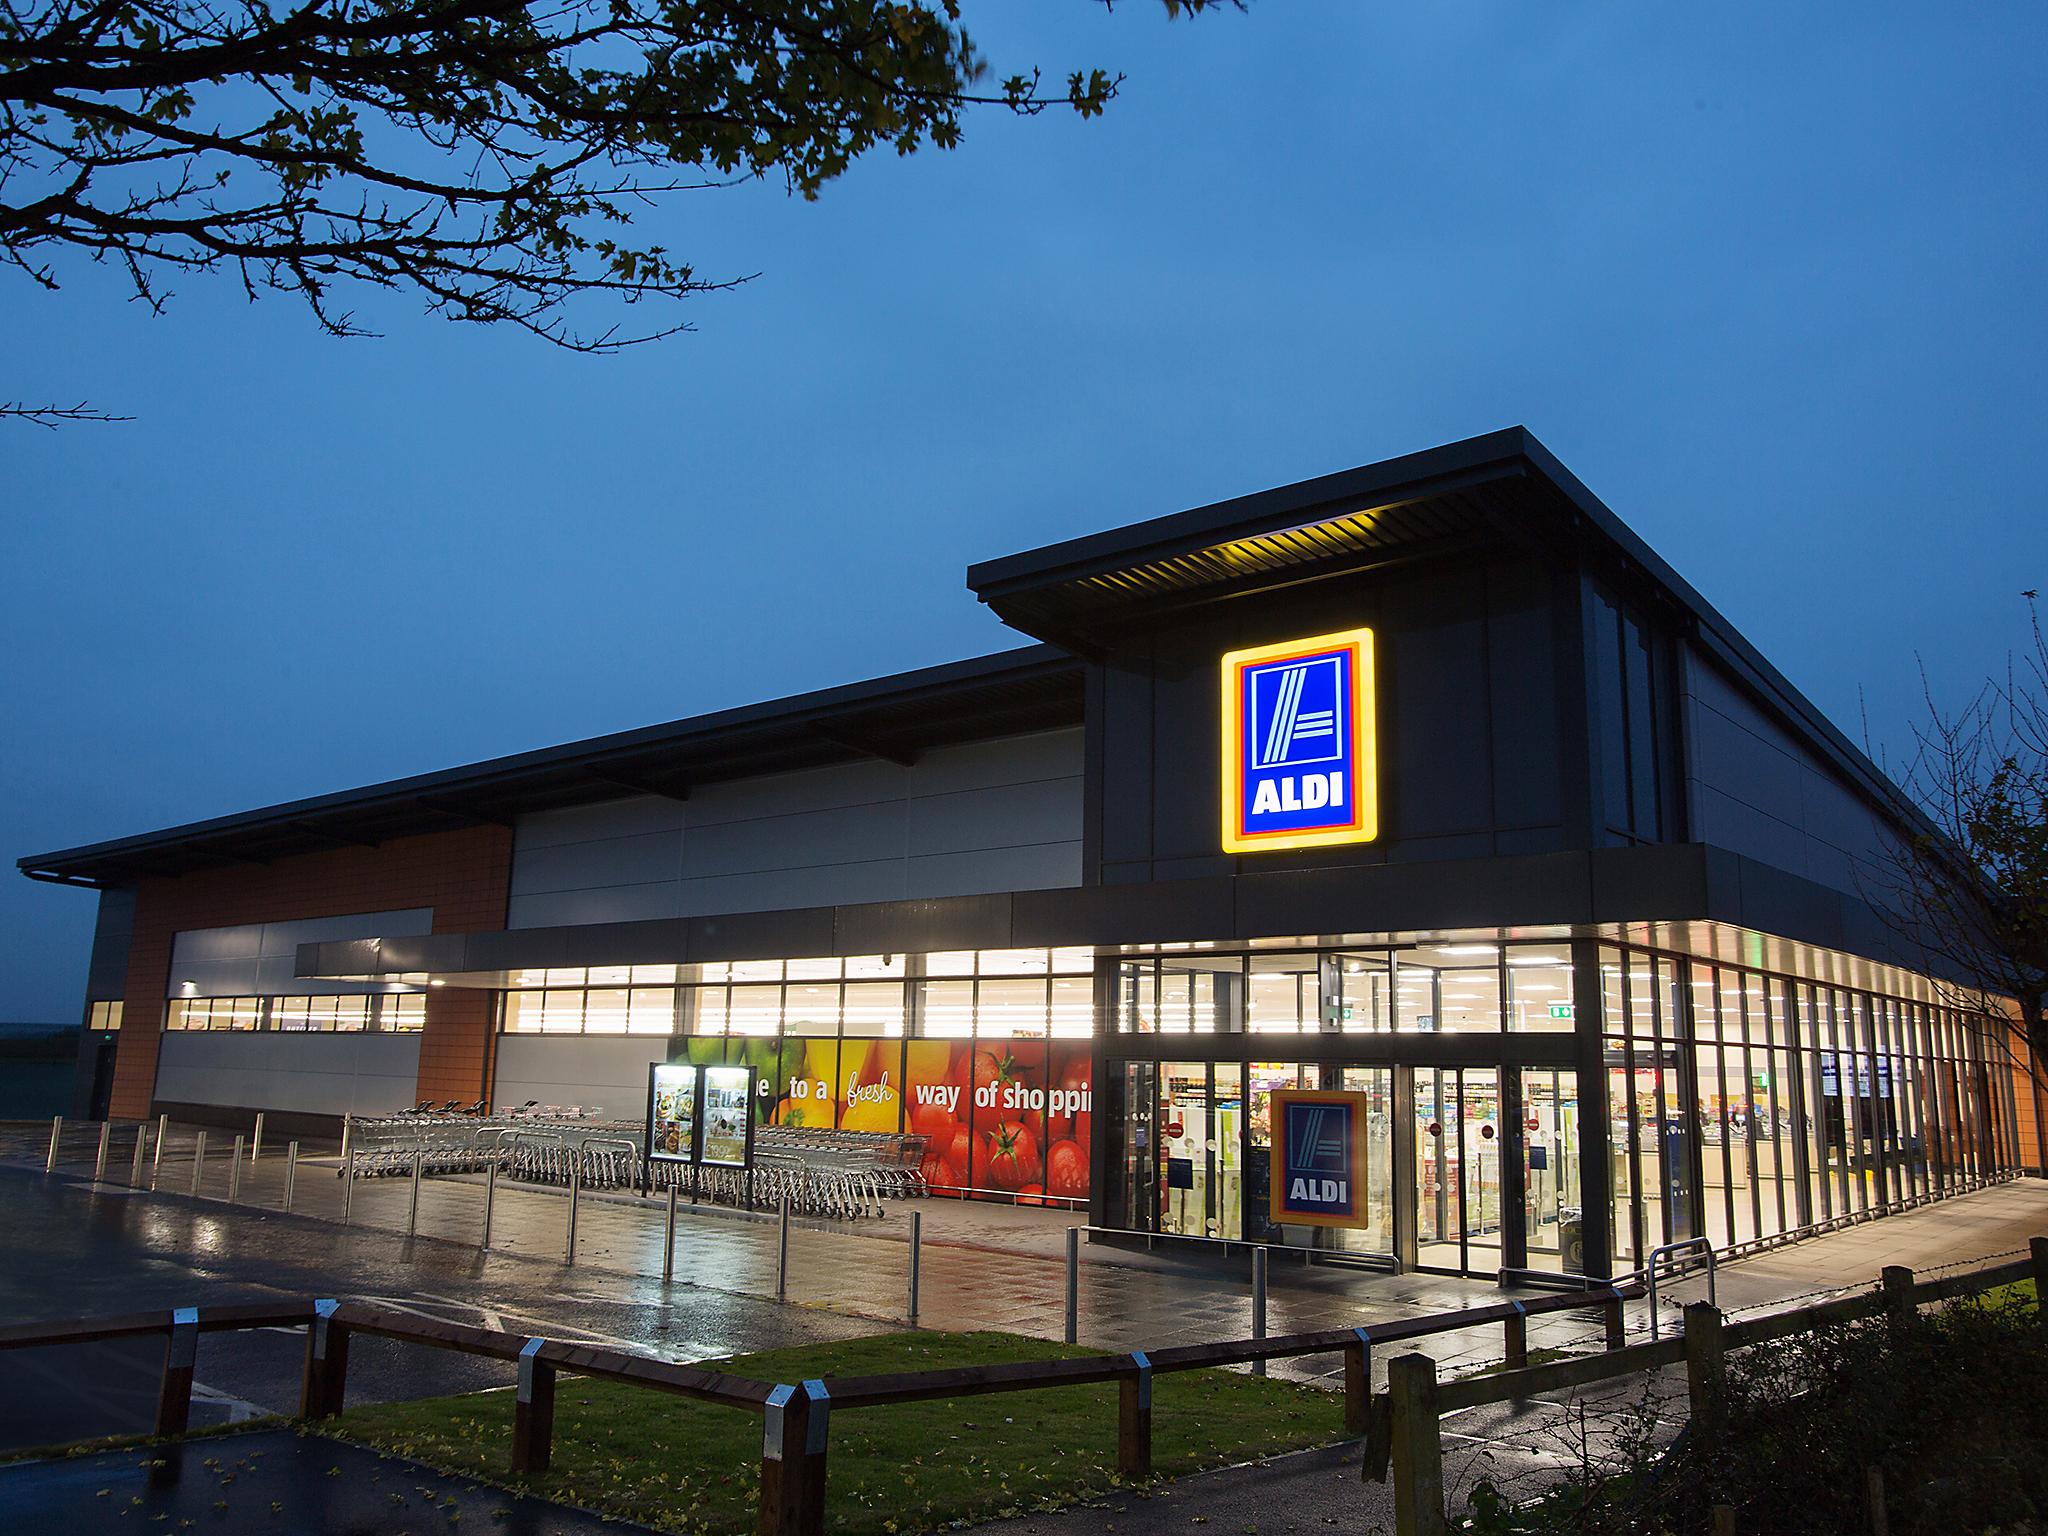 Aldi has announced it will increase its minimum pay rate for store staff across the UK to £8.53 an hour from February 1.